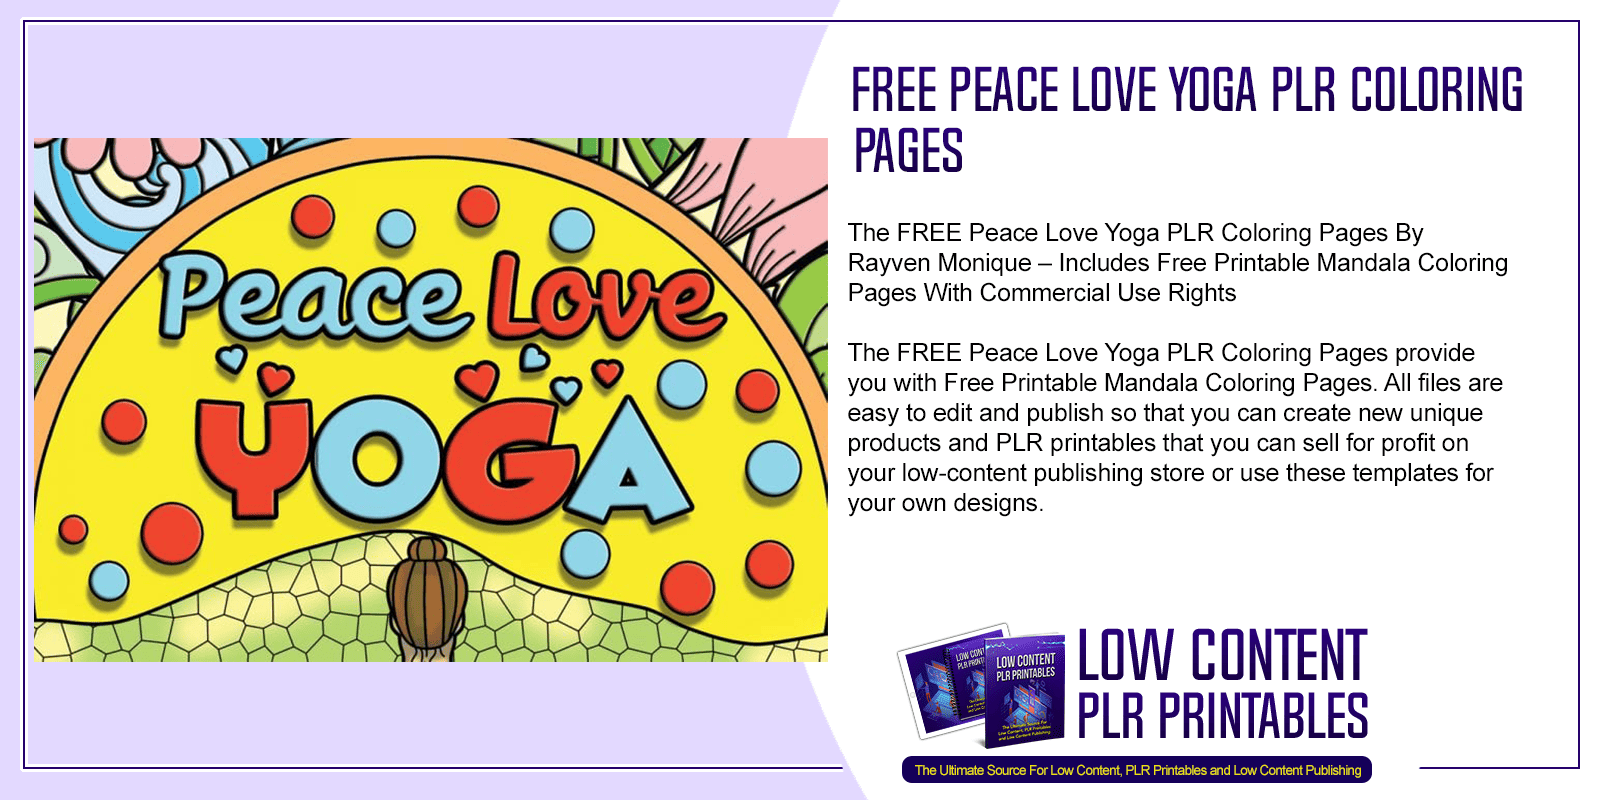 FREE Peace Love Yoga PLR Coloring Pages